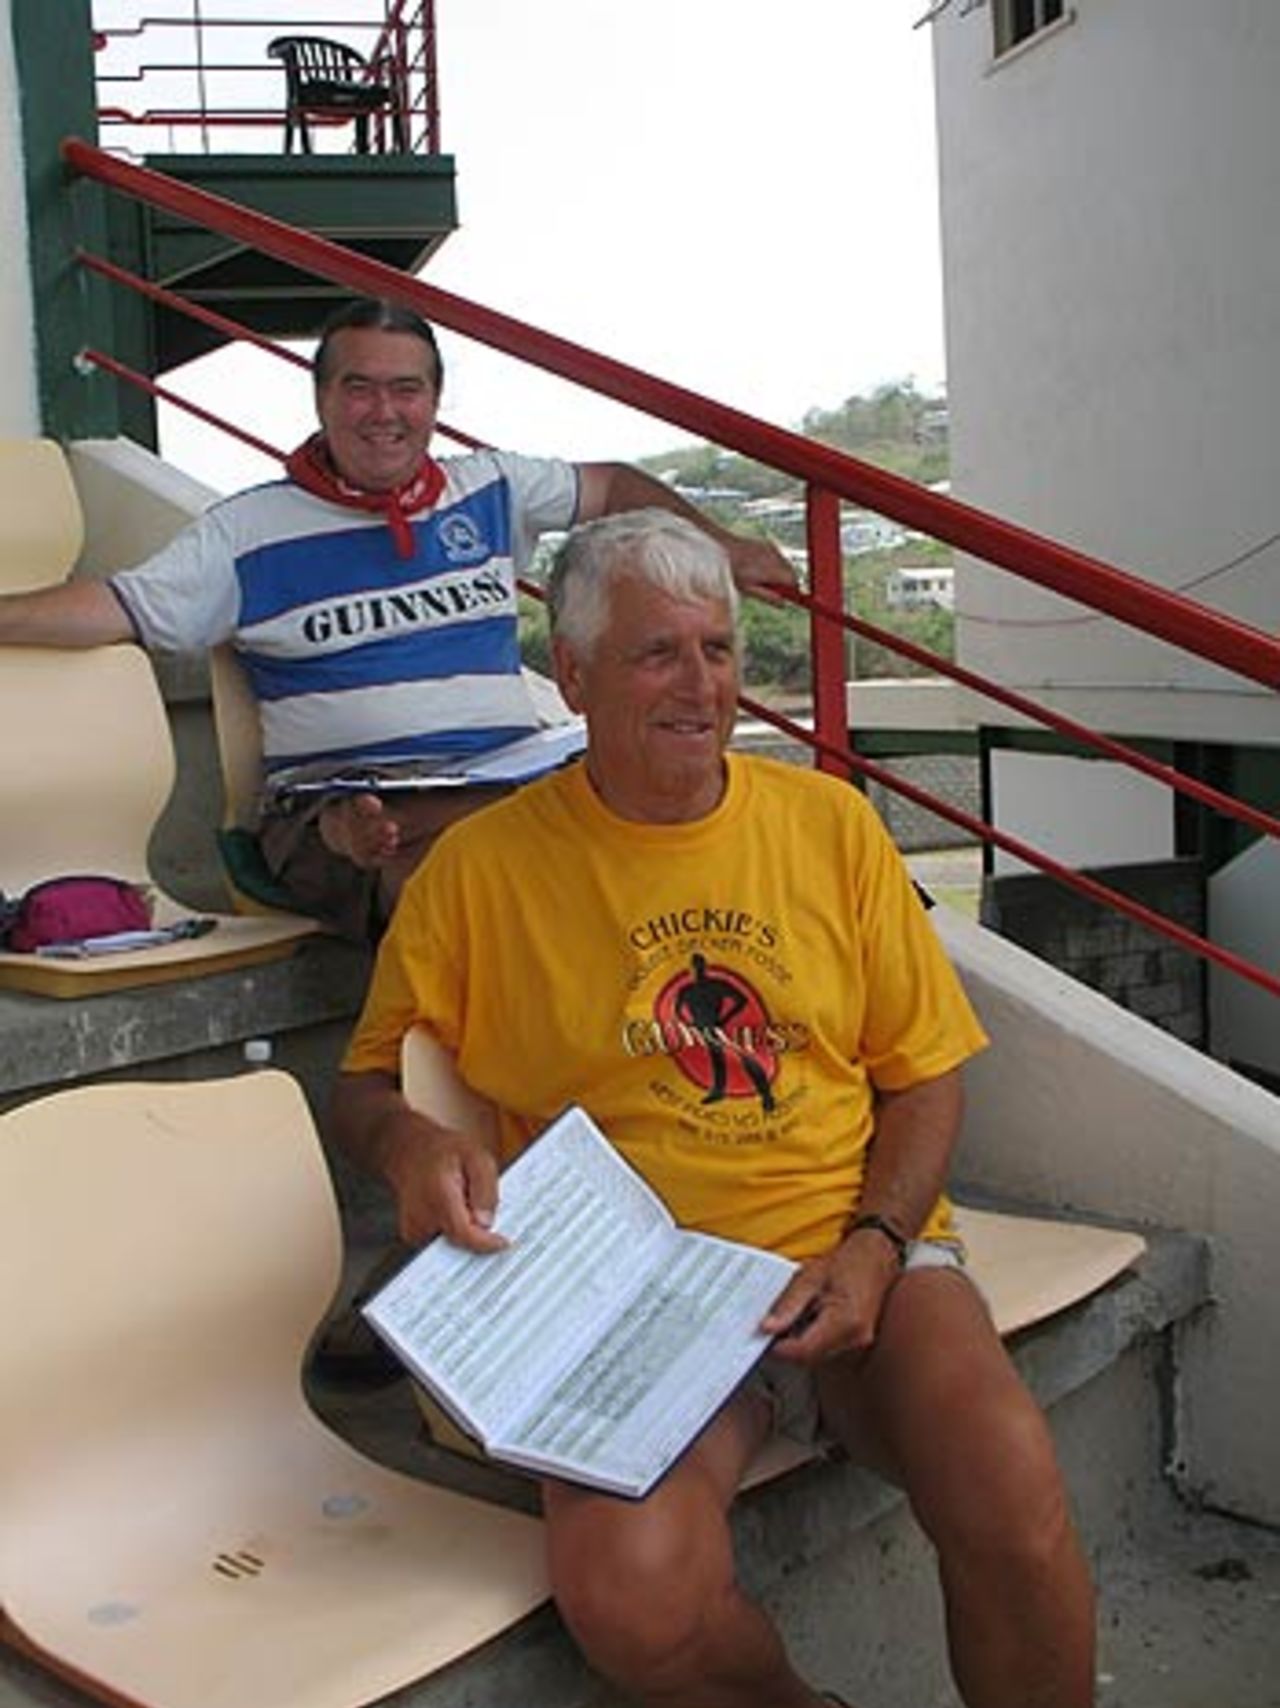 John Woods and Peter Chismon spotted at the Beausejour Stadium, West Indies v India, 2nd Test, St Lucia, 5th day, June 14, 2006